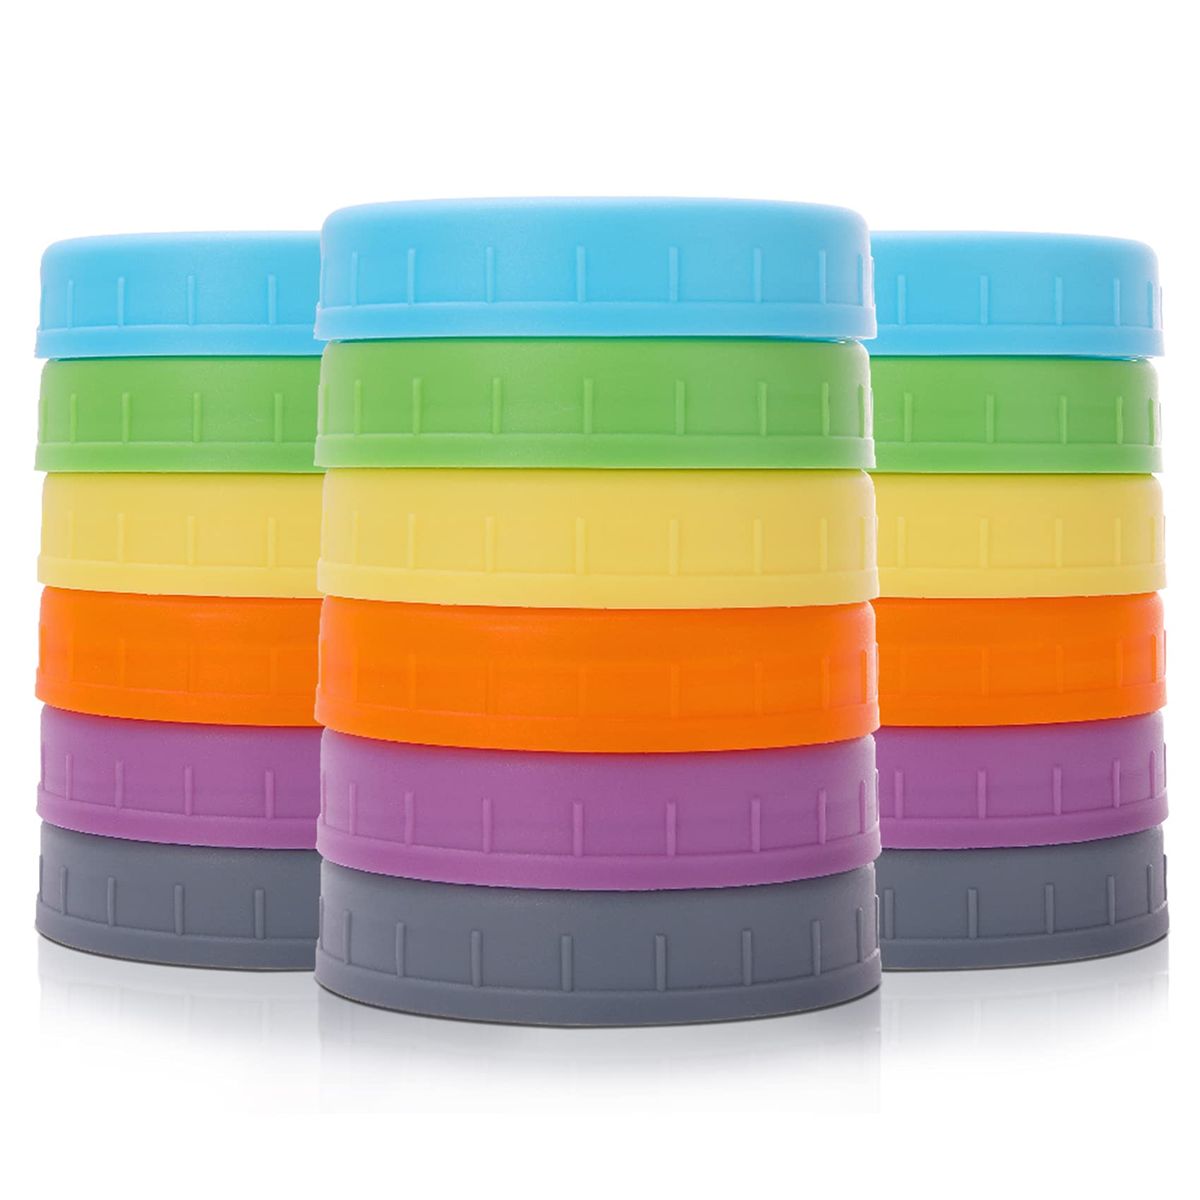 Maisonware Reusable Leakproof Silicone Mason Jar Lids - Pack of 18